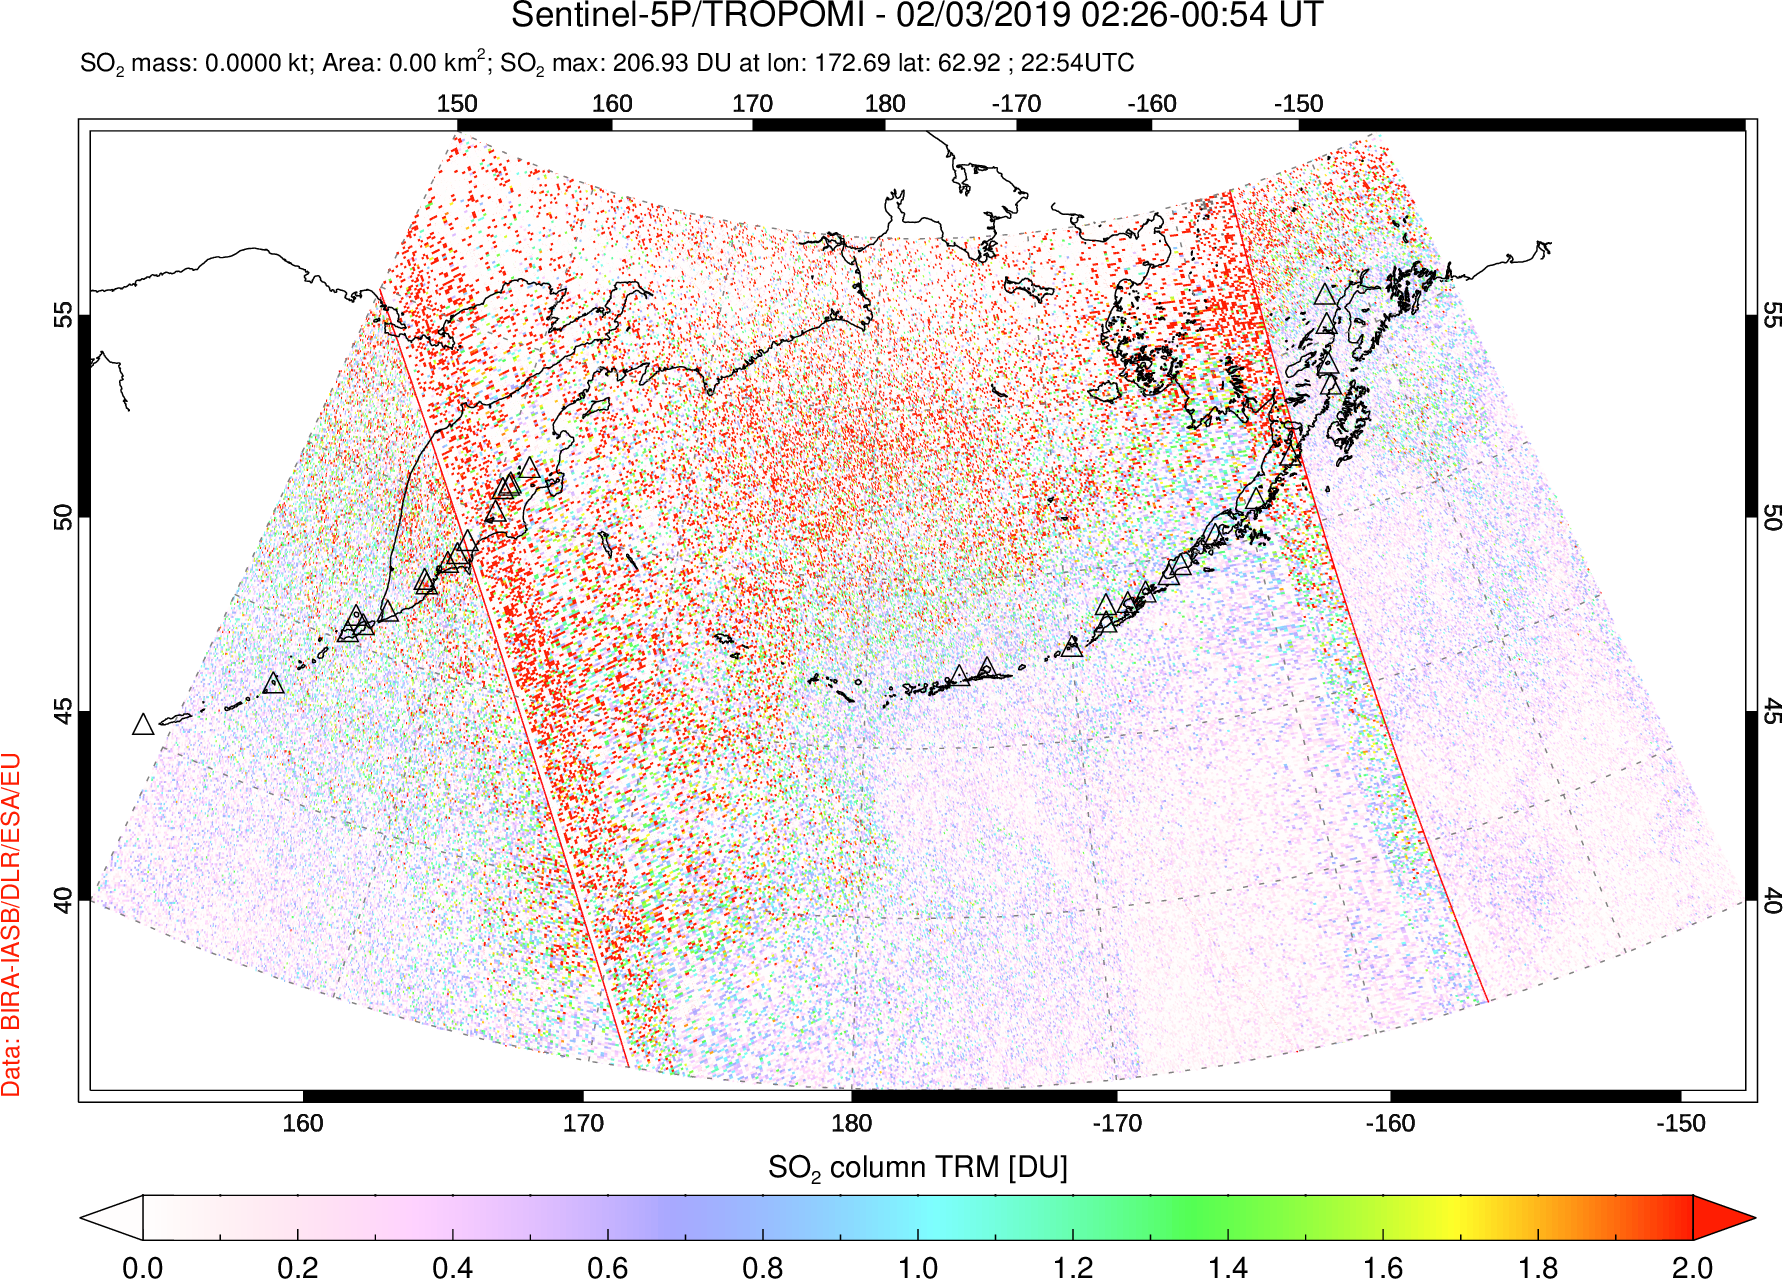 A sulfur dioxide image over North Pacific on Feb 03, 2019.